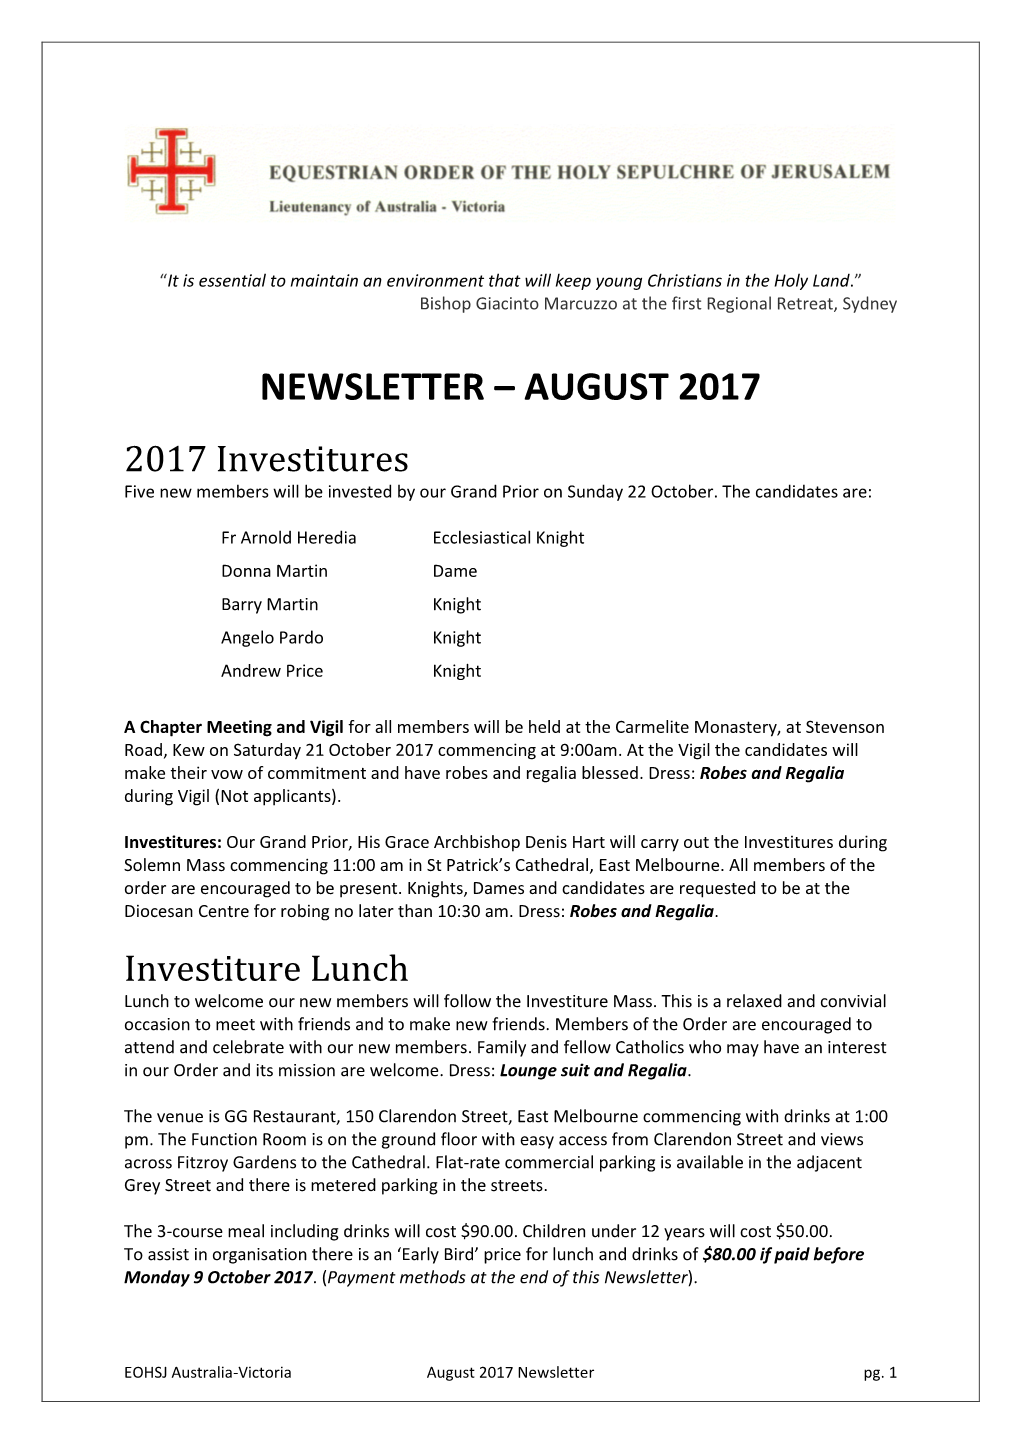 NEWSLETTER – AUGUST 2017 2017 Investitures Five New Members Will Be Invested by Our Grand Prior on Sunday 22 October